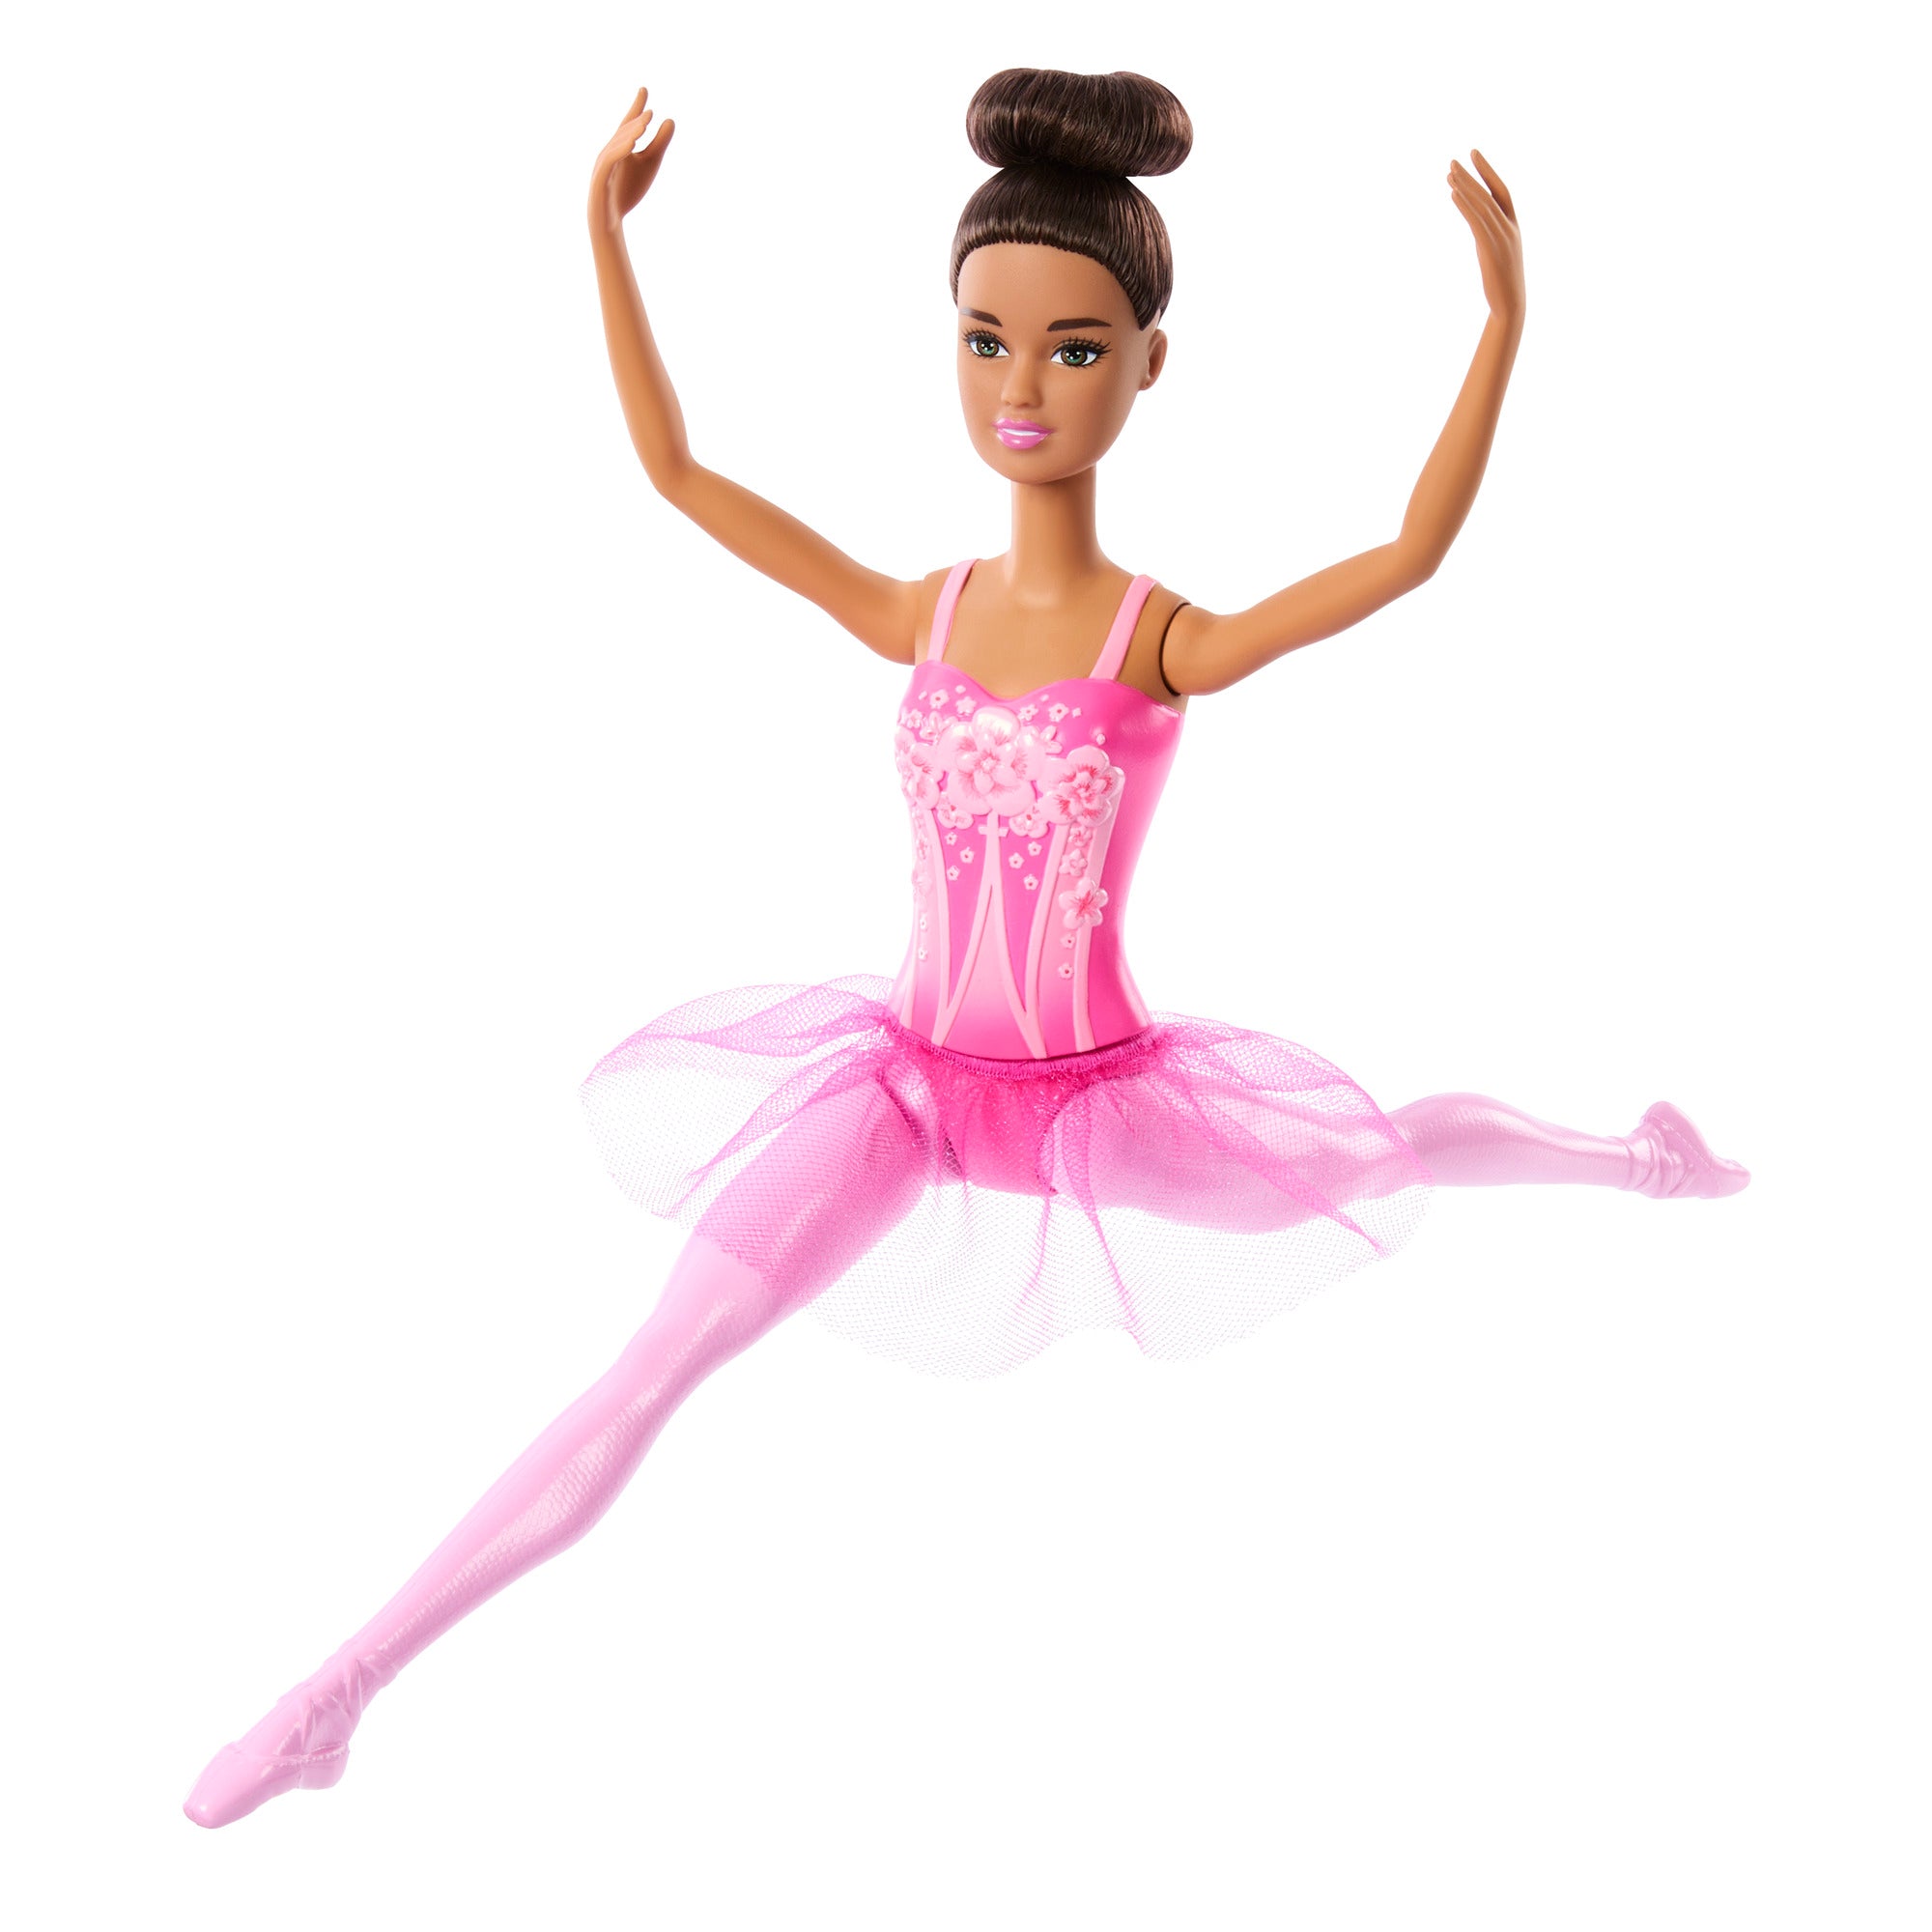 Barbie Ballerina Doll, Brunette Fashion Doll Wearing Pink Removable Tutu, Posed with Ballet Arms & “en Pointe” Toe Shoes